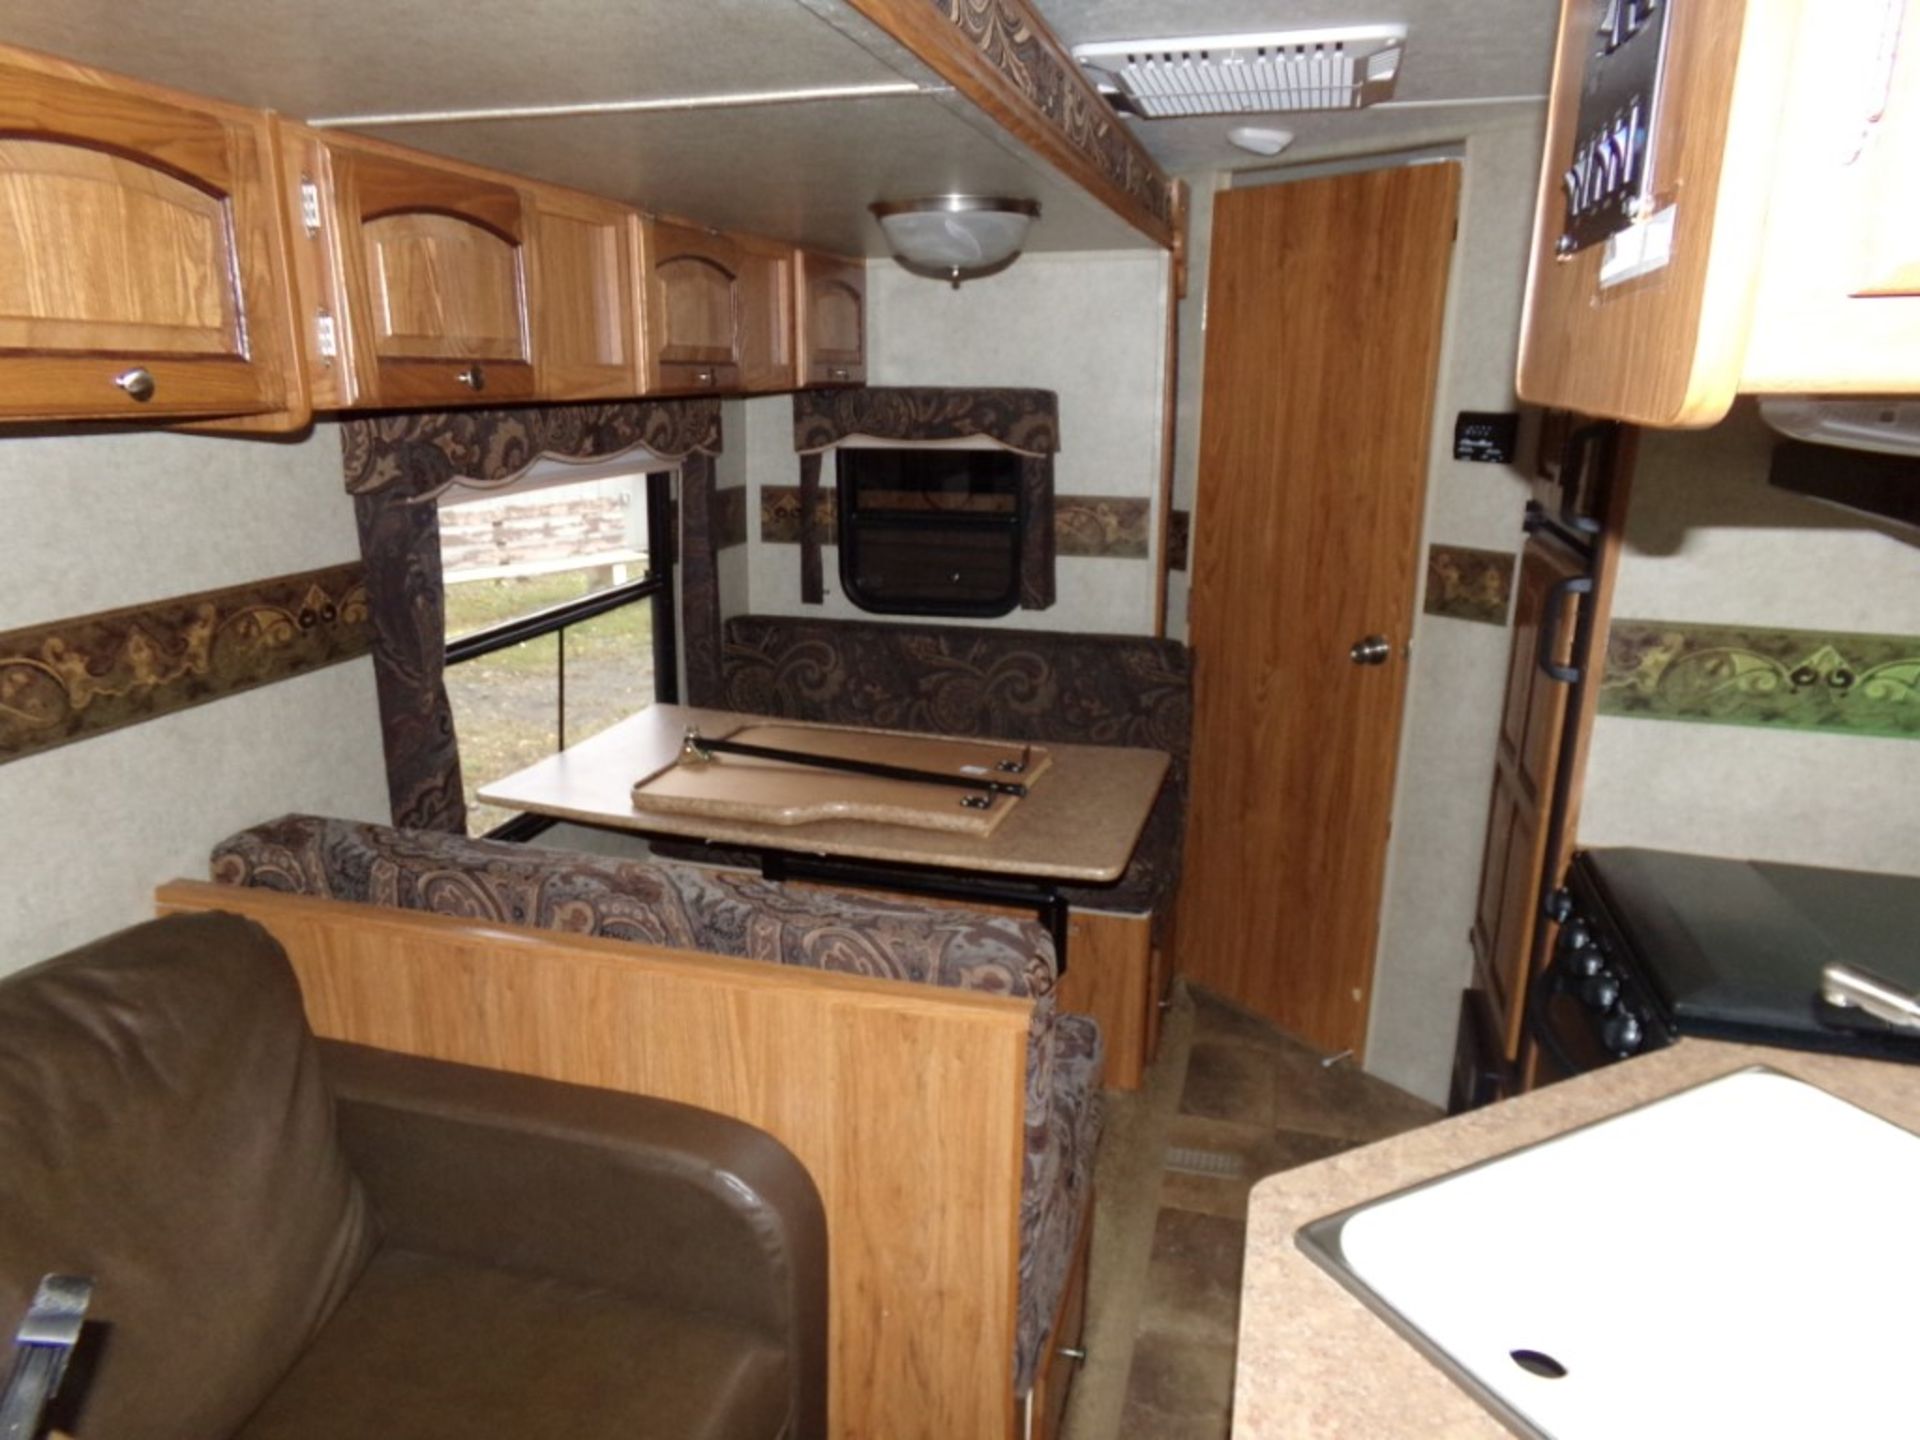 2013 Forest River Rockway Ultra Lite Camper, Approx 28', (1) Big Slide-Out, Approx. 12' Wide, - Image 5 of 7